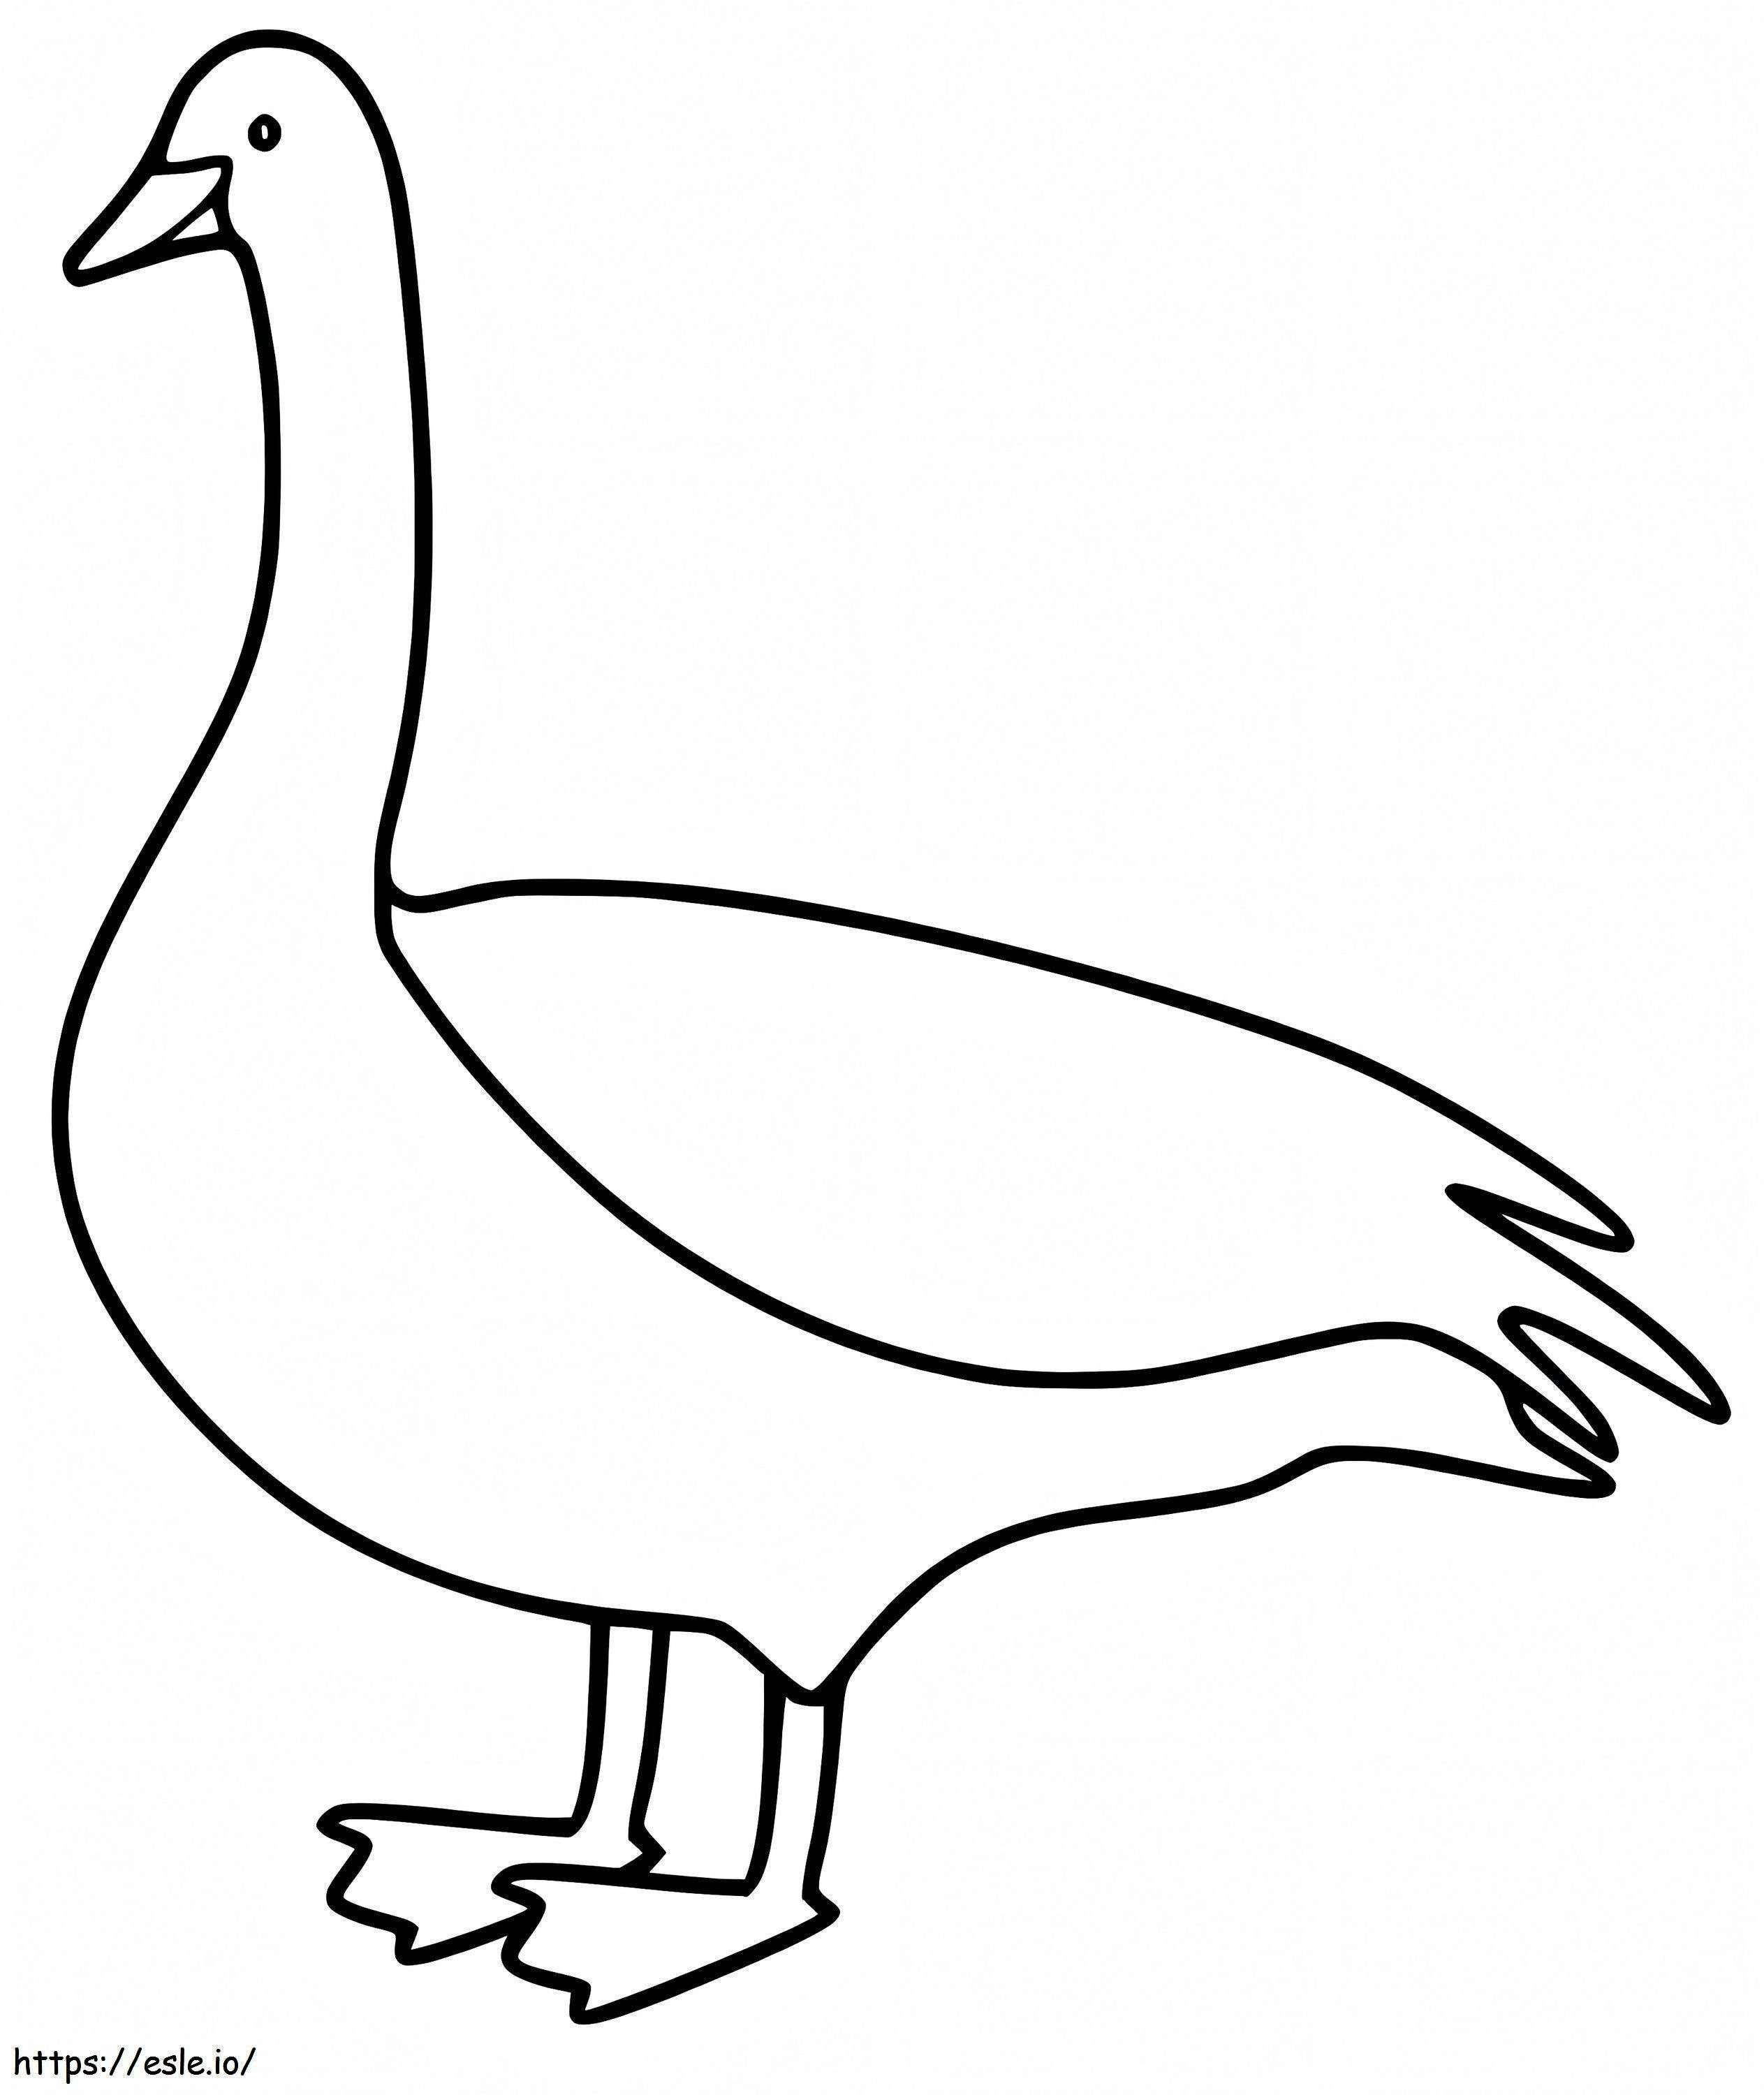 Goose 9 coloring page